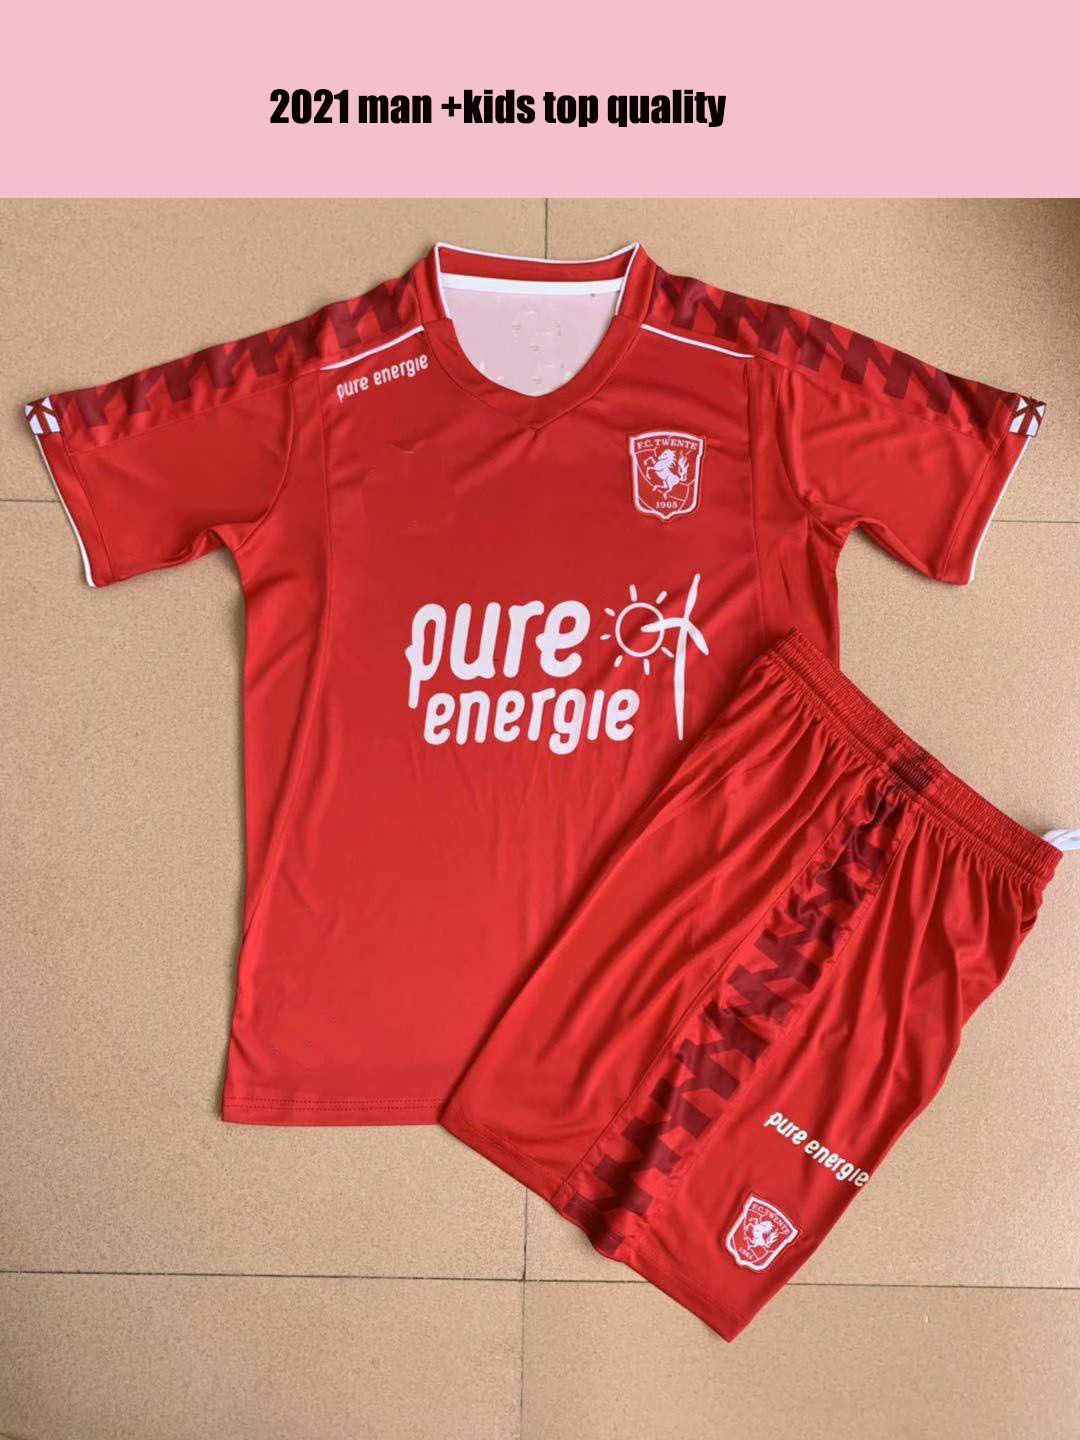 2021 Wholesale Fc 2020 2021 Twente Man Kids Soccer Jersey Kit Tracksuits 20 21 Football Boys Shirt With Shorts Sets From Sellernn 15 55 Dhgate Com